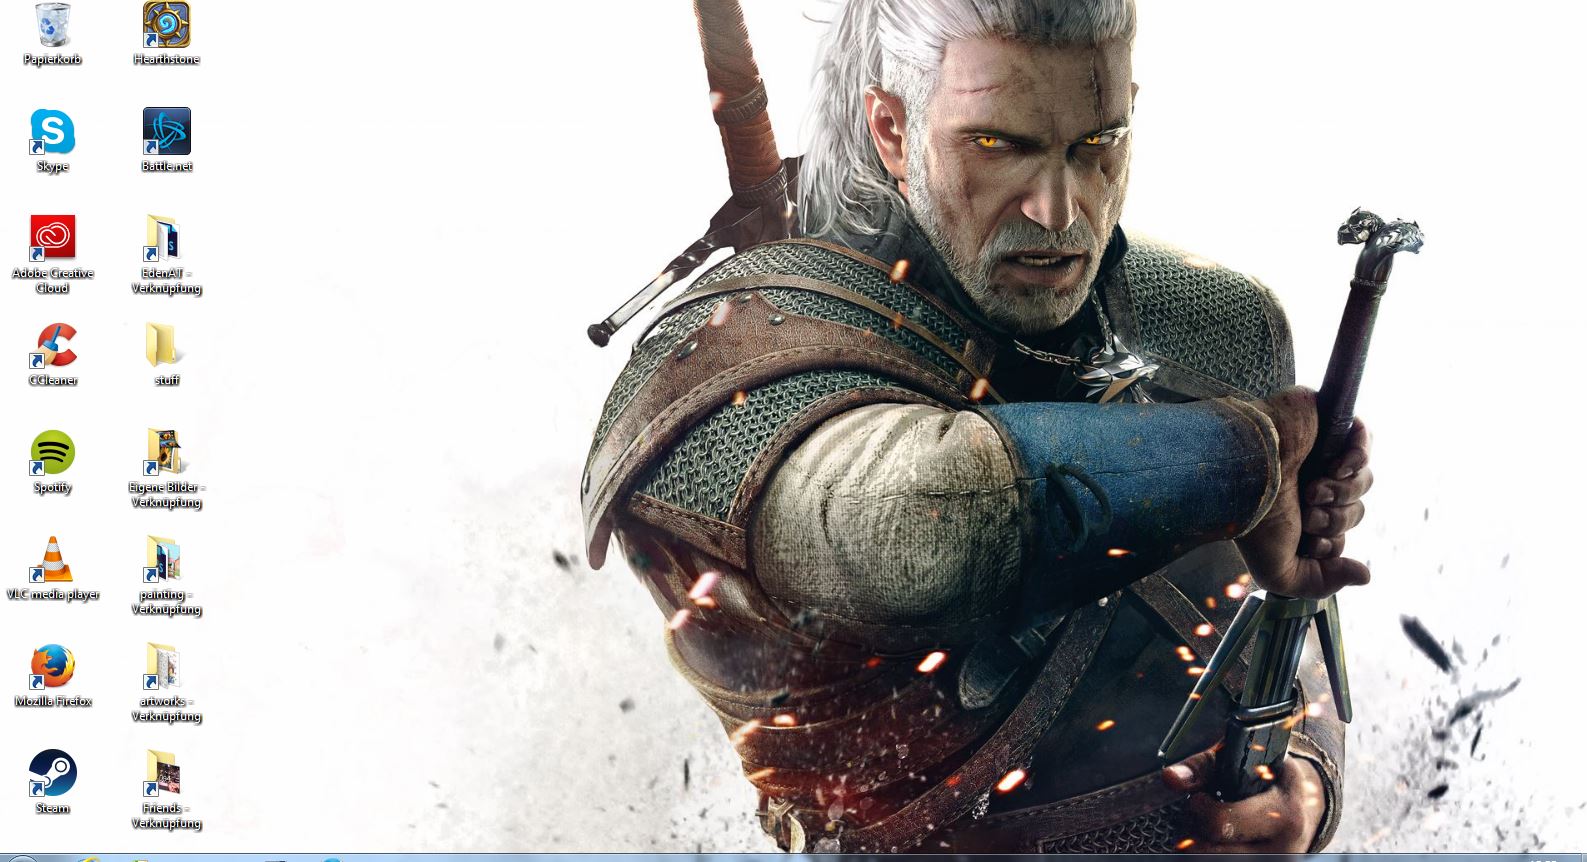 Geralt's face when I finish masturbating and close the browser